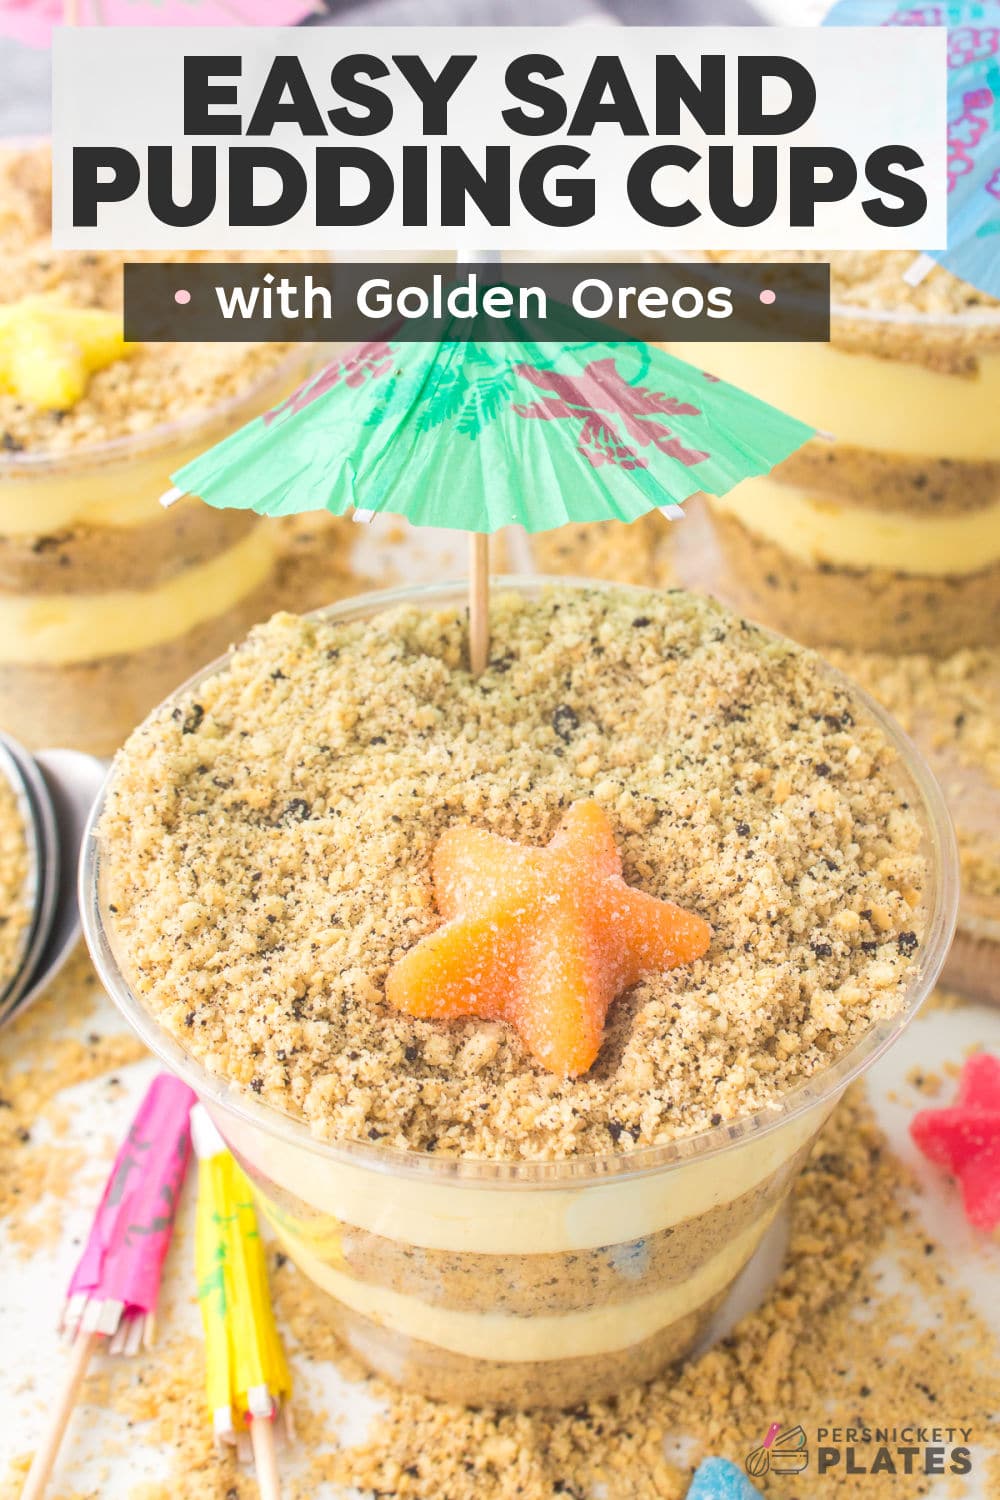 Golden Oreo Sand Pudding is such a fun summer treat! You make Oreo cookie "sand" and layer it with pudding to create a beach themed dessert that looks just like sand. Serve it out of a bucket for a crowd or individual pudding cups.  | www.persnicketyplates.com